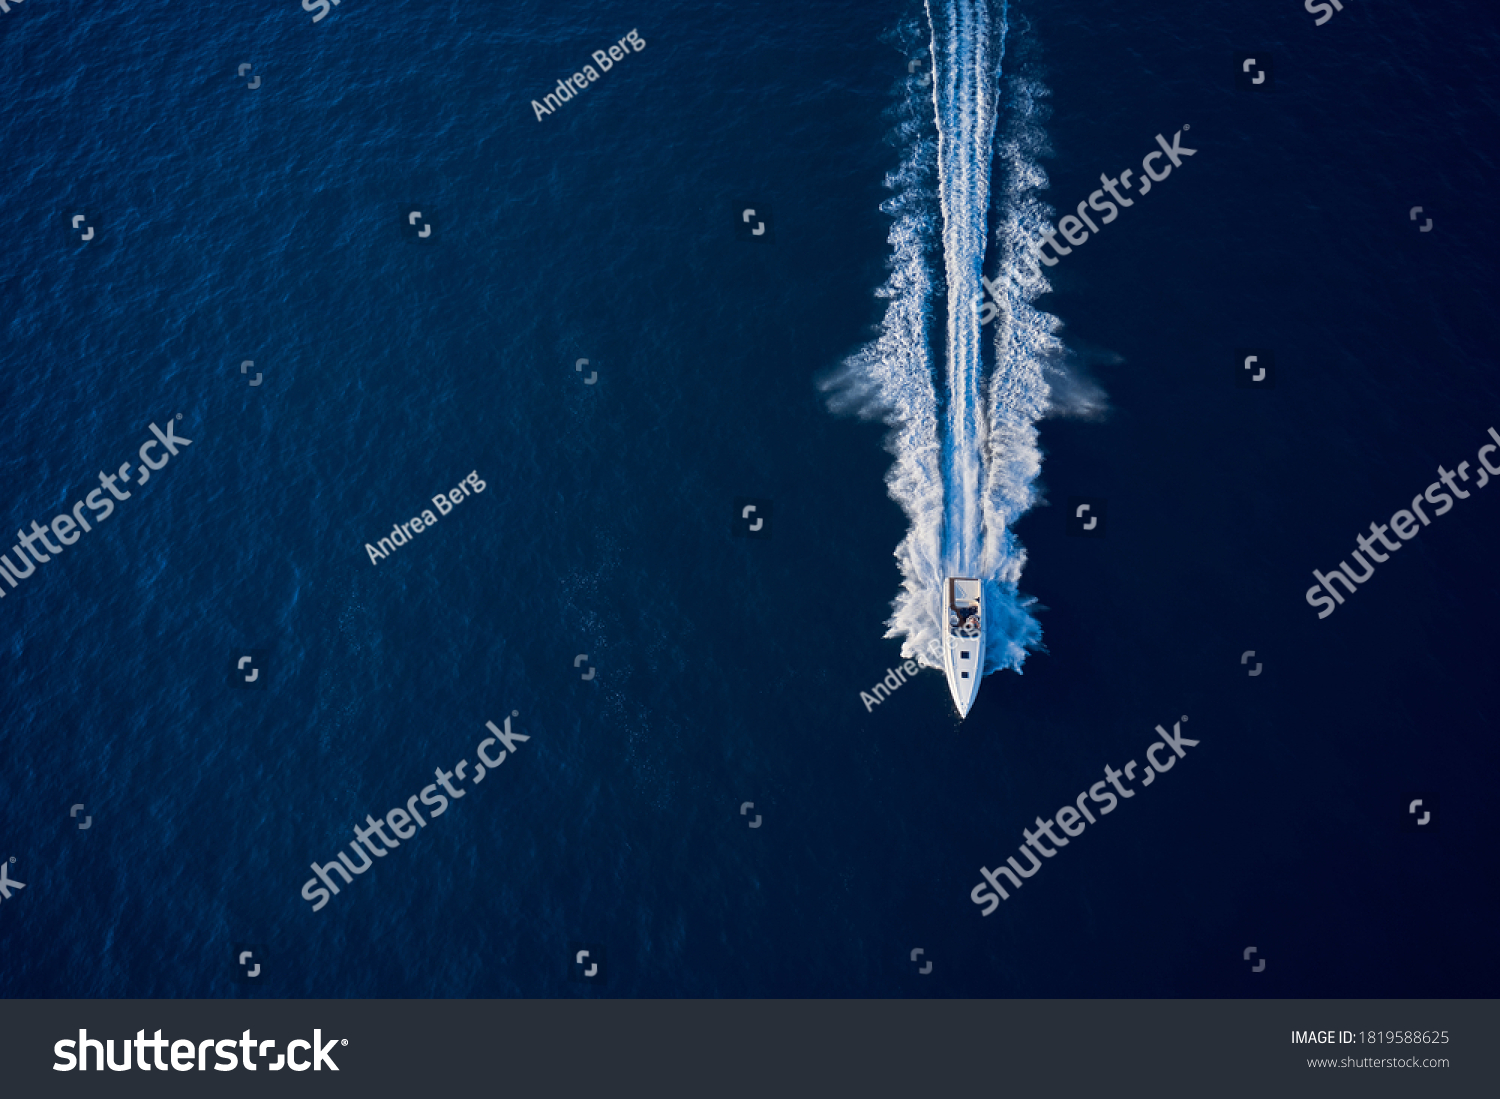 Large speed boat moving at high speed. Top view of a white boat sailing to the blue sea. Drone view of a boat sailing. Motor boat in the sea. Travel - image. #1819588625